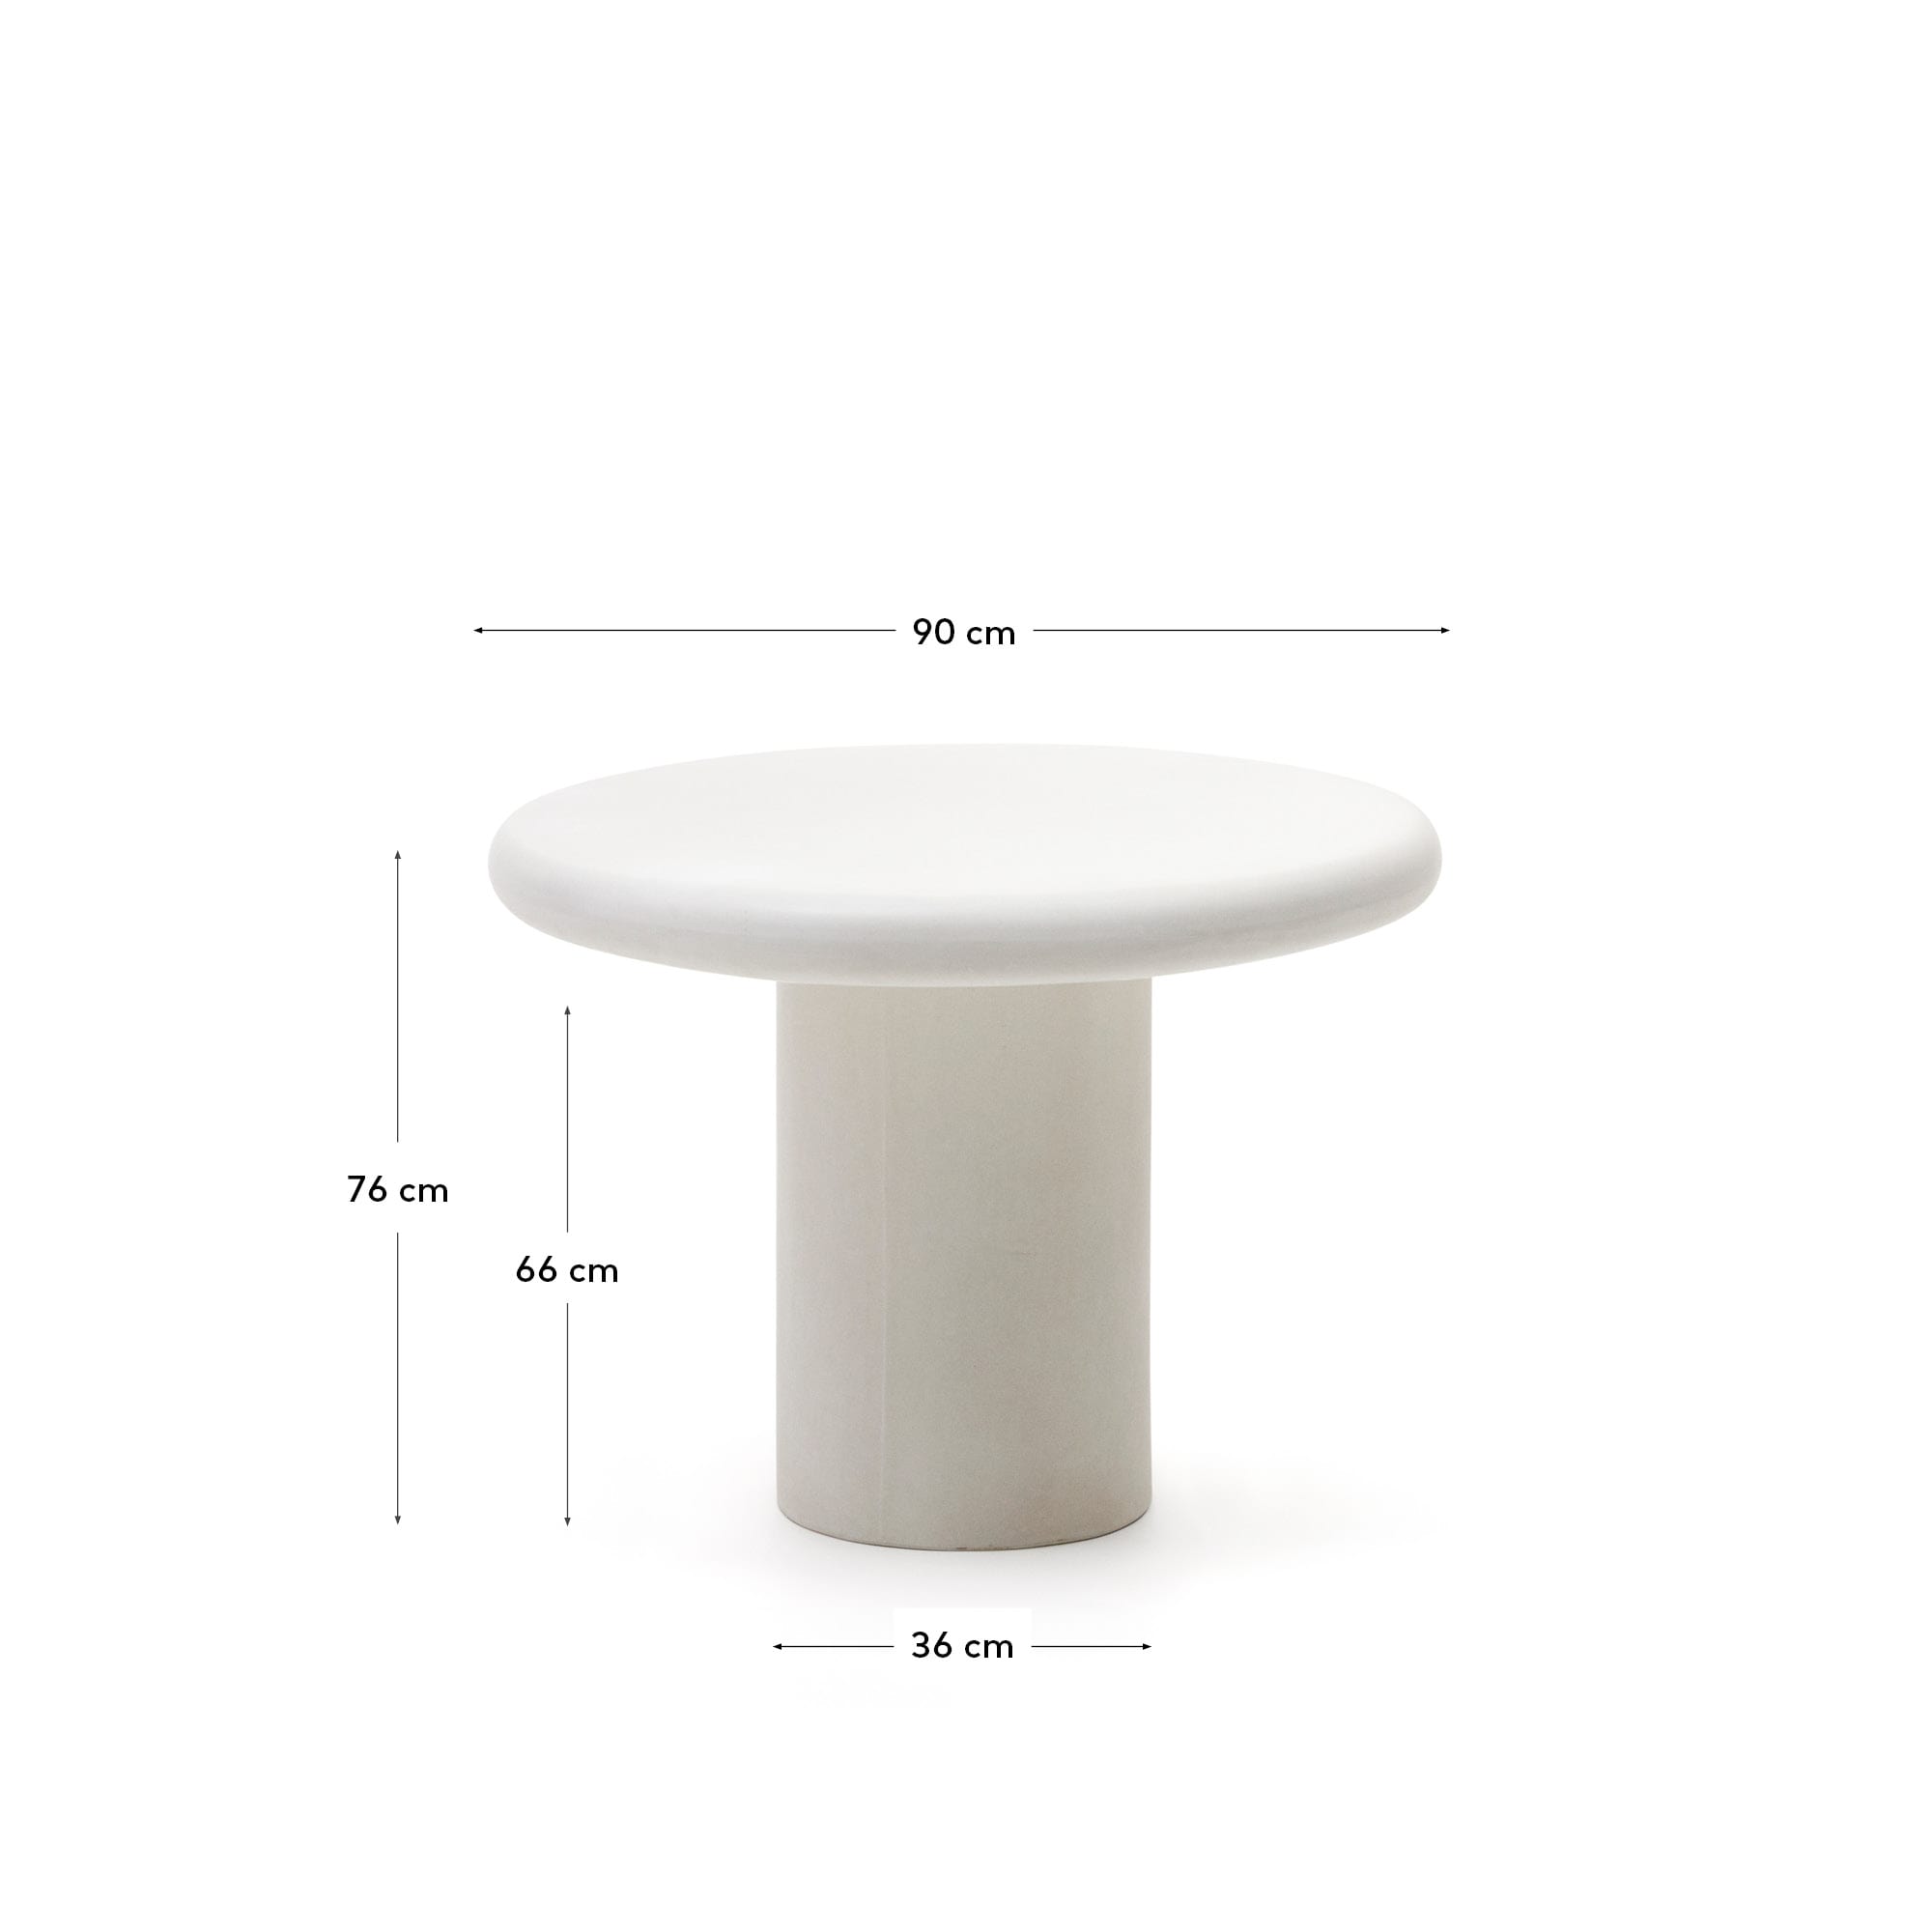 Addaia Round Table in White Cement Ø90 cm - sizes